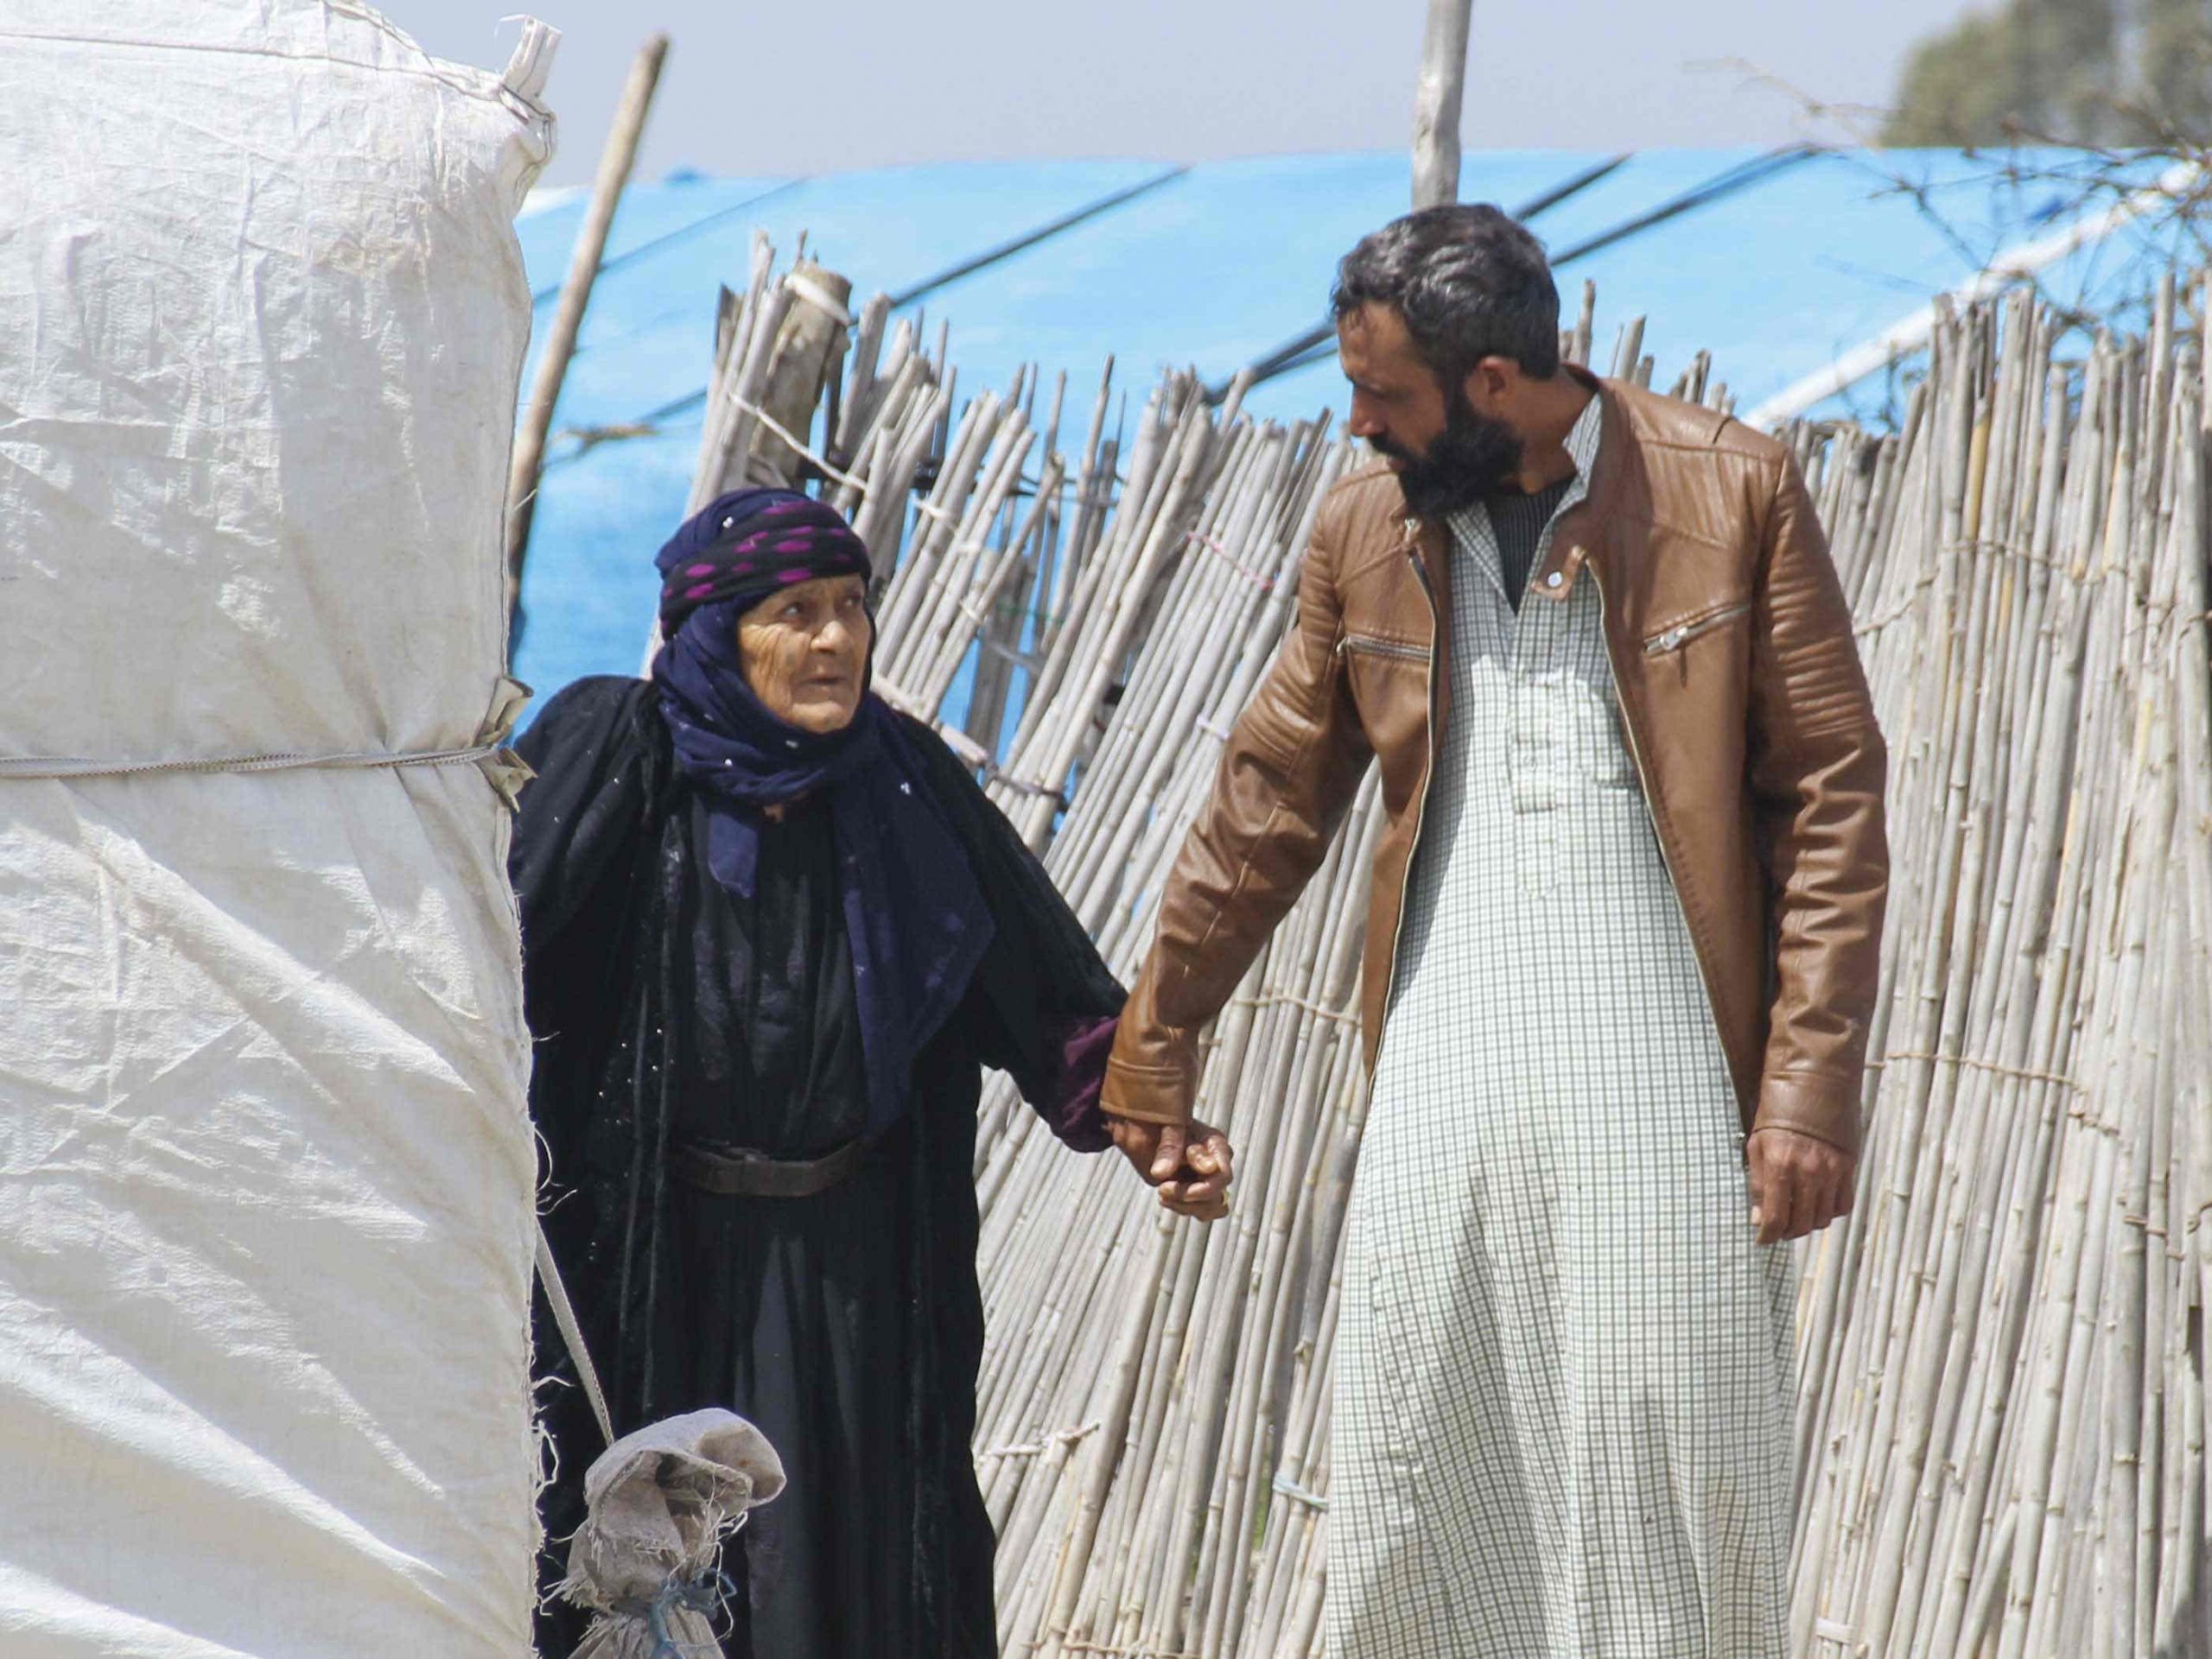 Christian missionary holds the hand of an elderly refugee woman in a refugee camp